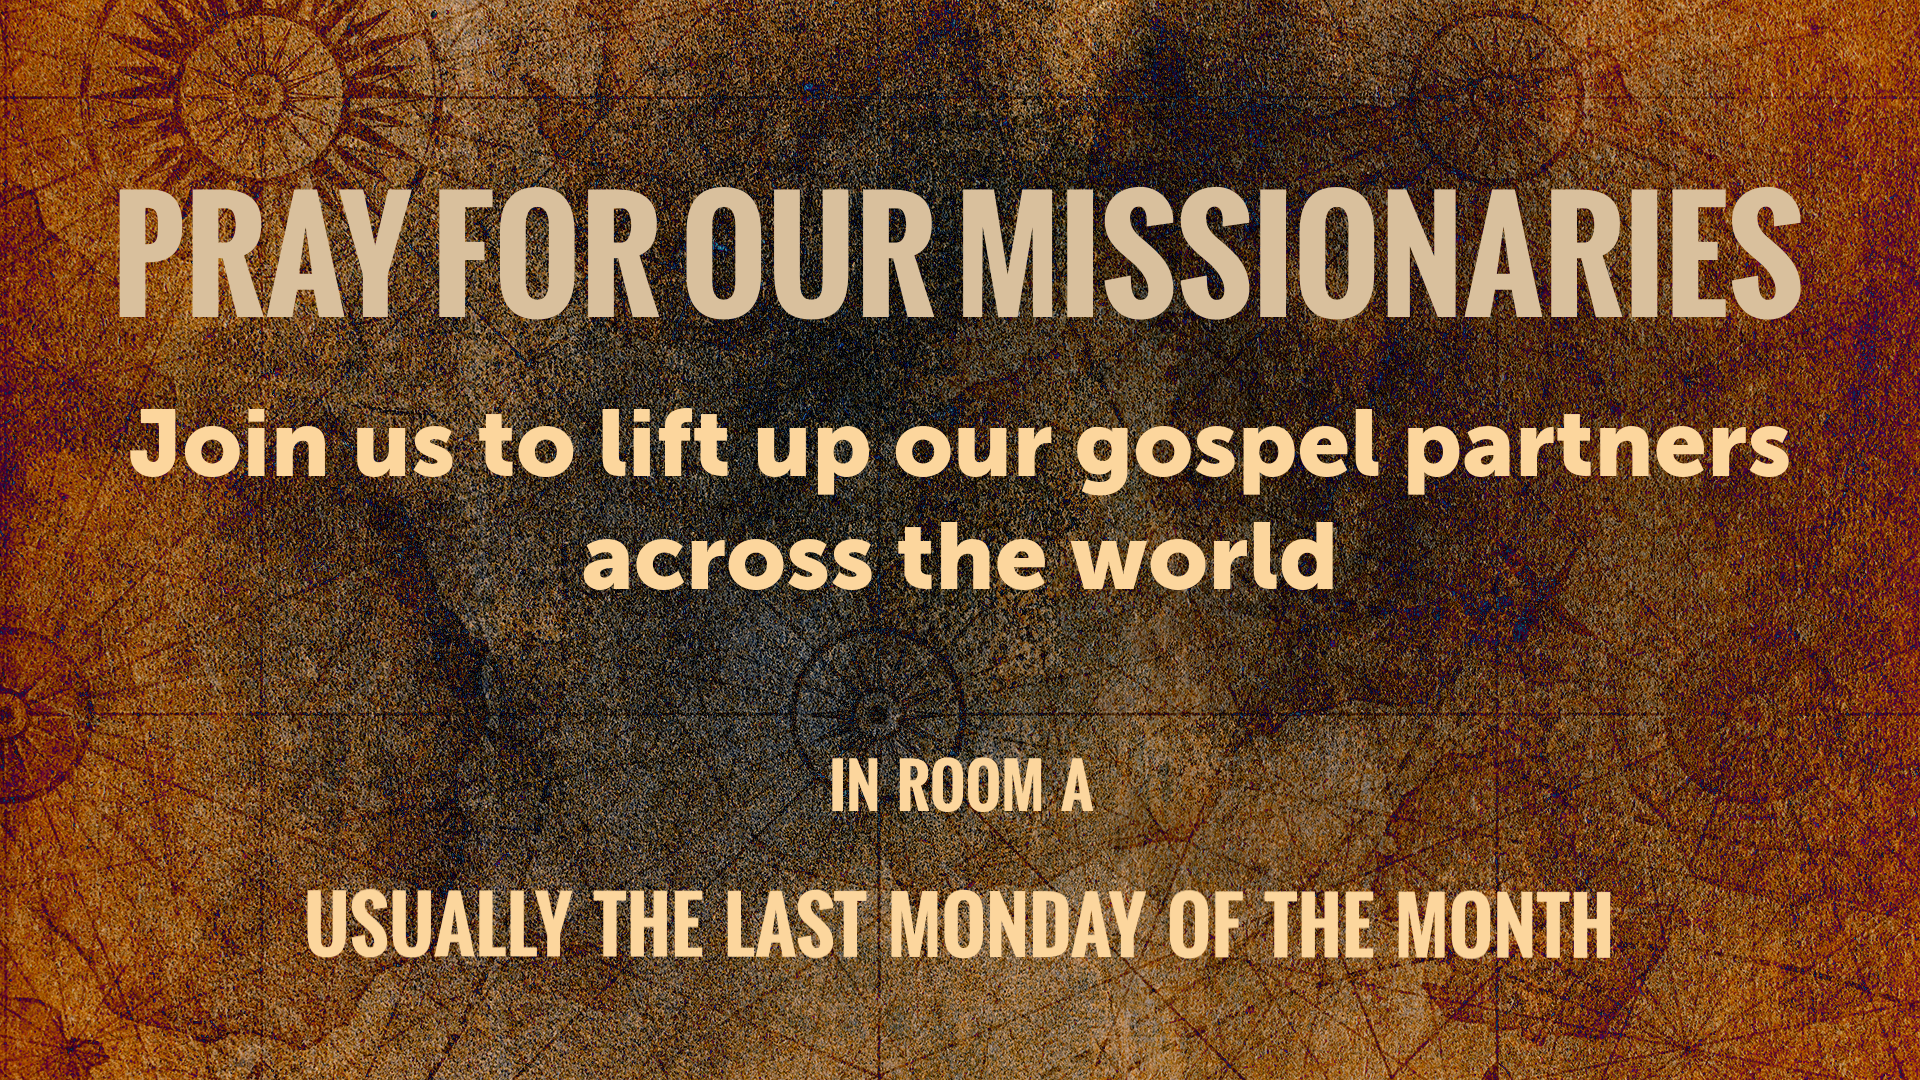 Website Pray for Our Missionaries image